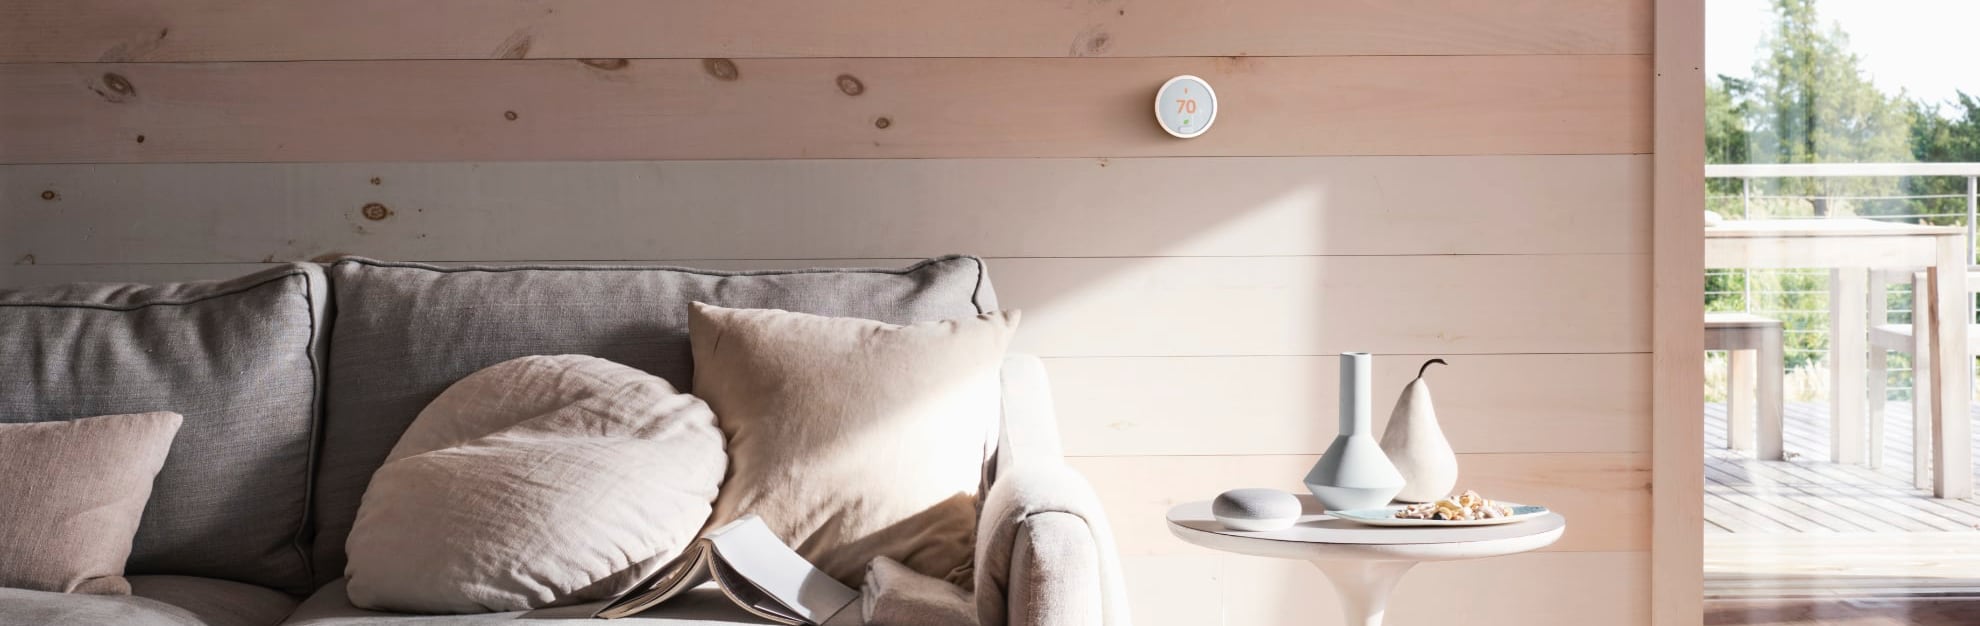 Vivint Home Automation in New Brunswick